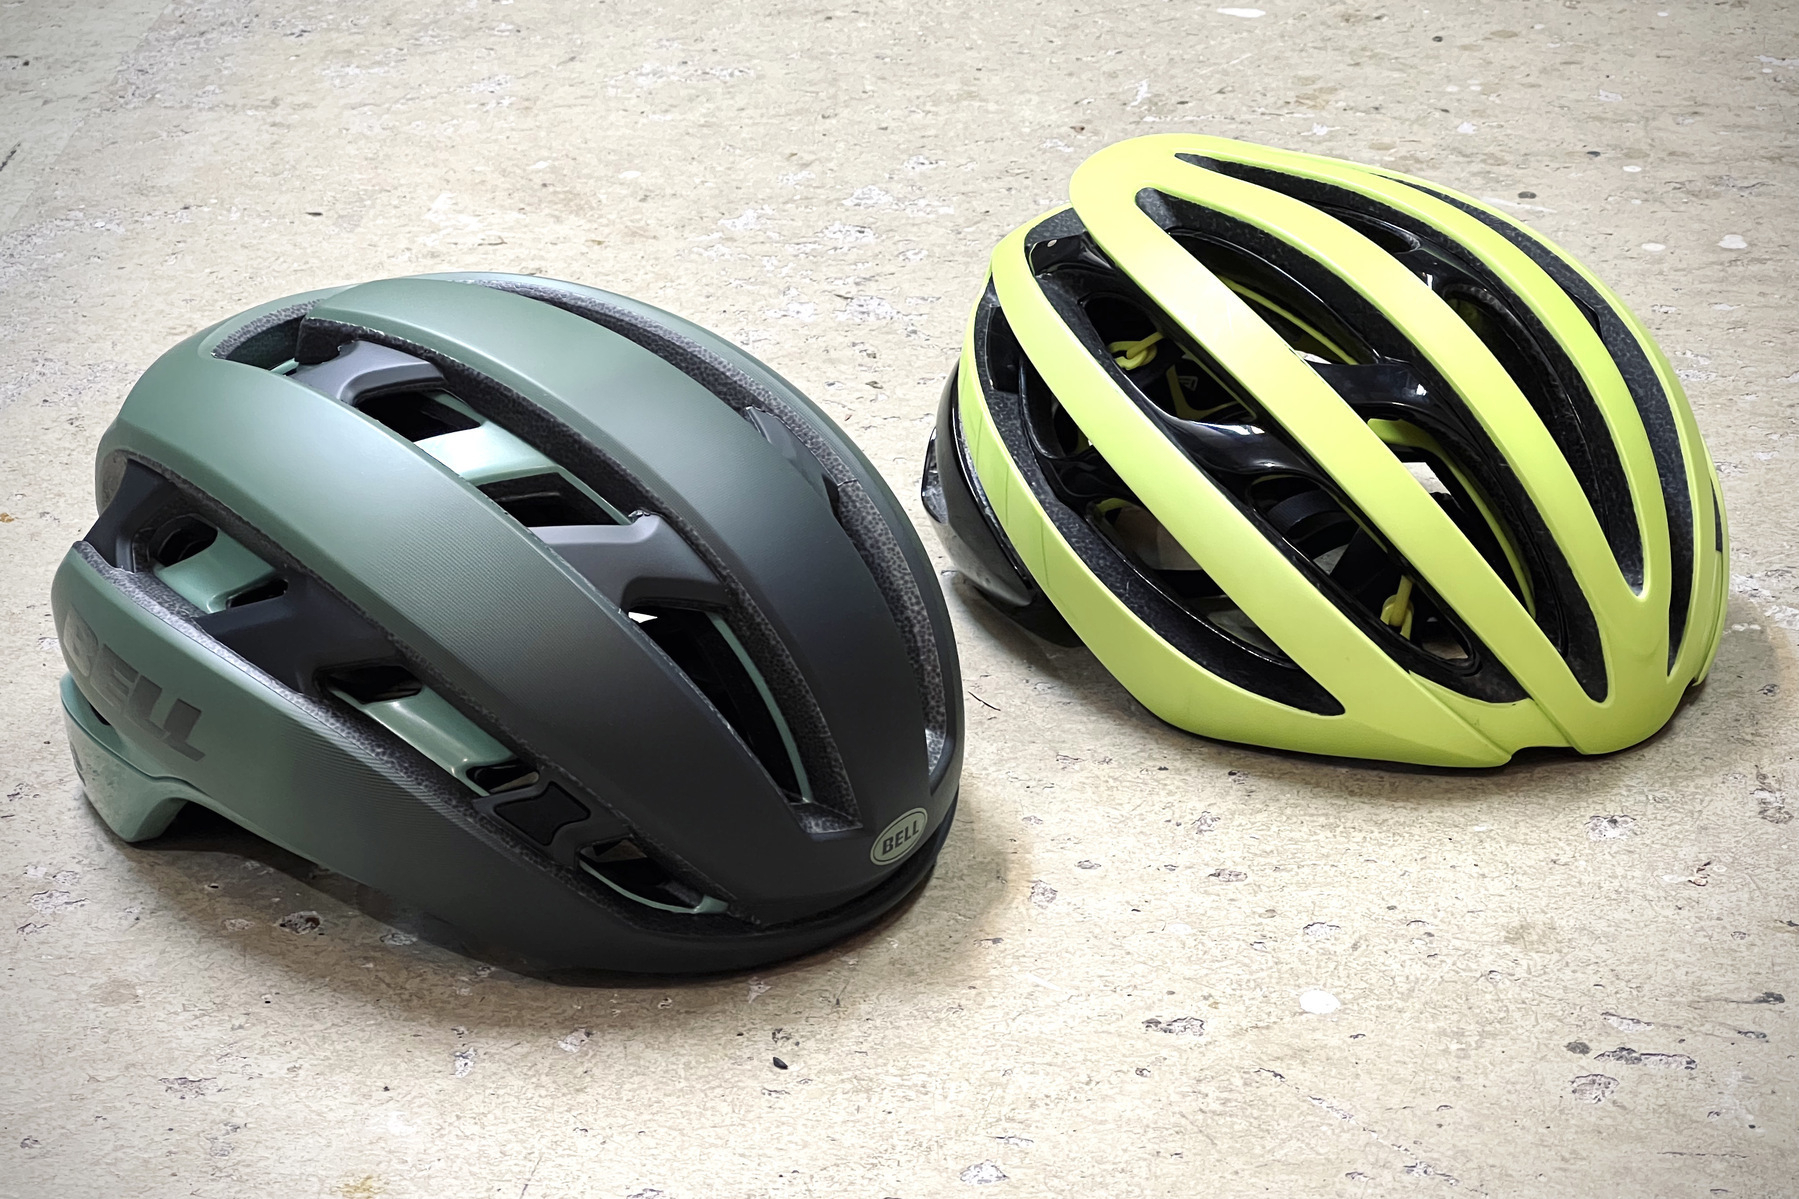 Two cycling helmets laying on a sealed concrete floor. A dark grey and green helmet in the foreground and on the left and a neon yellow helmet diagonally behind it and on the right. Both helmets face the viewer at an angle. The green helmet has straighter lines and a cleaner design overall while the neon yellow helmet has a more fluid, organic design with bigger vents.